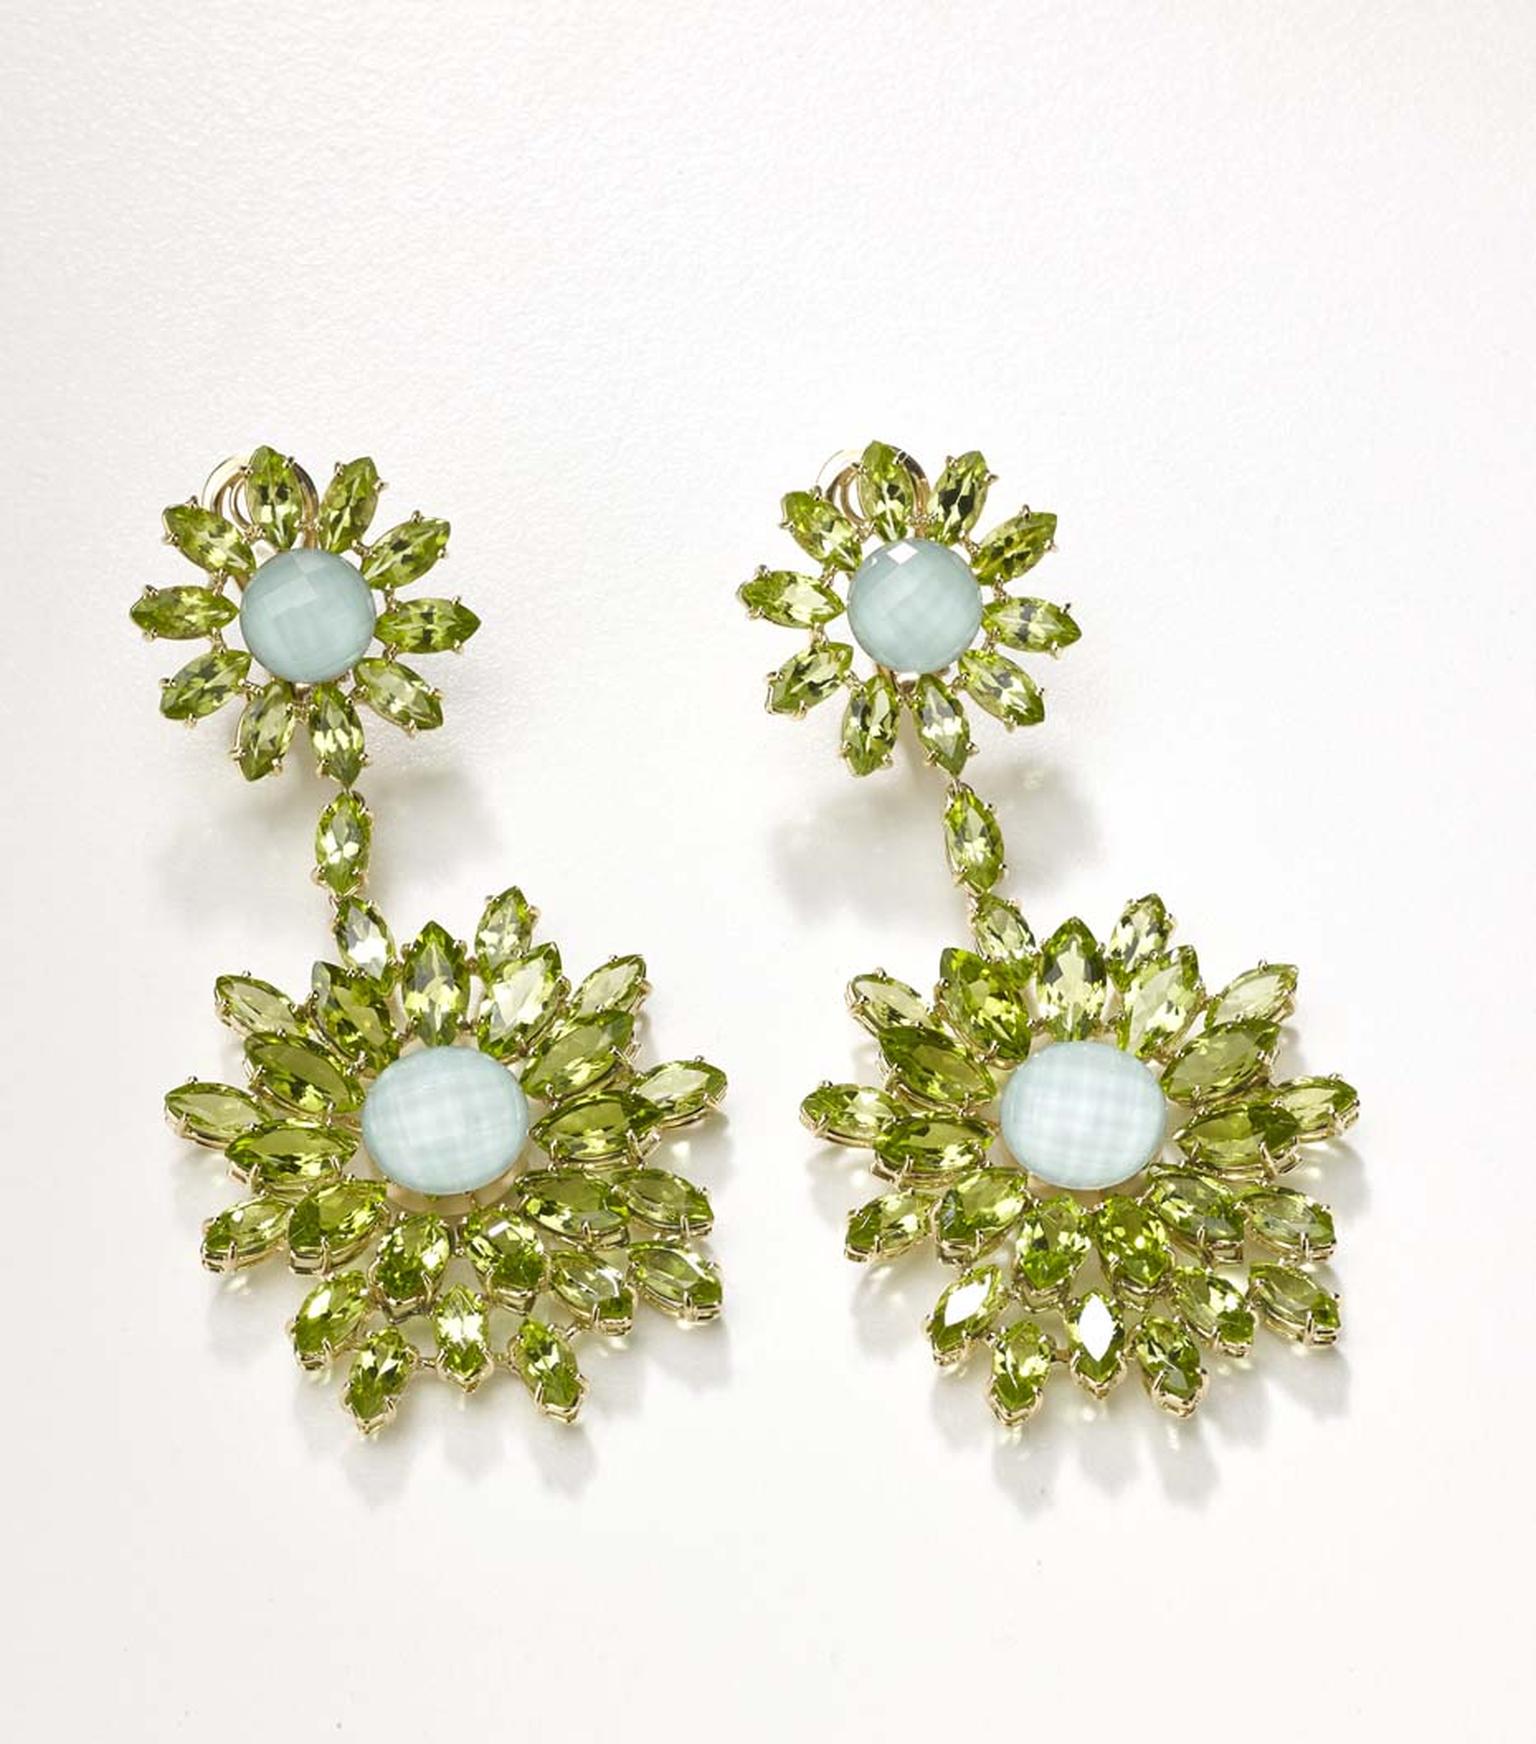 Meissen earrings with ice green porcelain and peridot, from the Haute Couture collection.